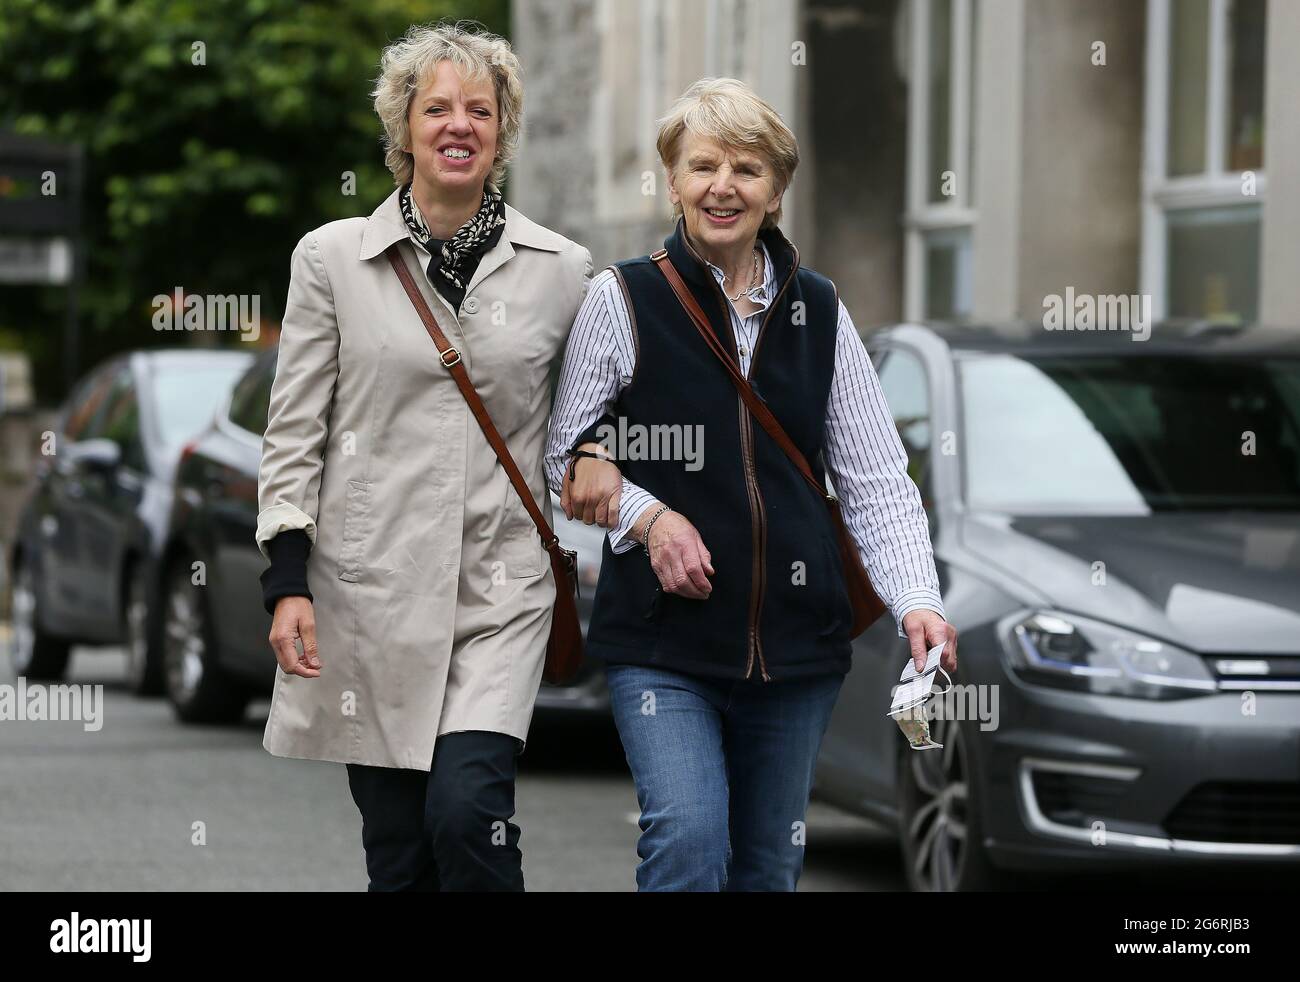 Labour candidate Senator Ivana Bacik accompanies her mother Rina to her polling station in Rathgar, Dublin, as voting in the Dublin Bay South by-election is under way. Polls opened at 7am and will close at 10.30pm, before the count begins on Friday. Picture date: Thursday July 8, 2021. The vote follows weeks of campaigning in the race to succeed ex-Fine Gael minister Eoghan Murphy in the constituency. Stock Photo